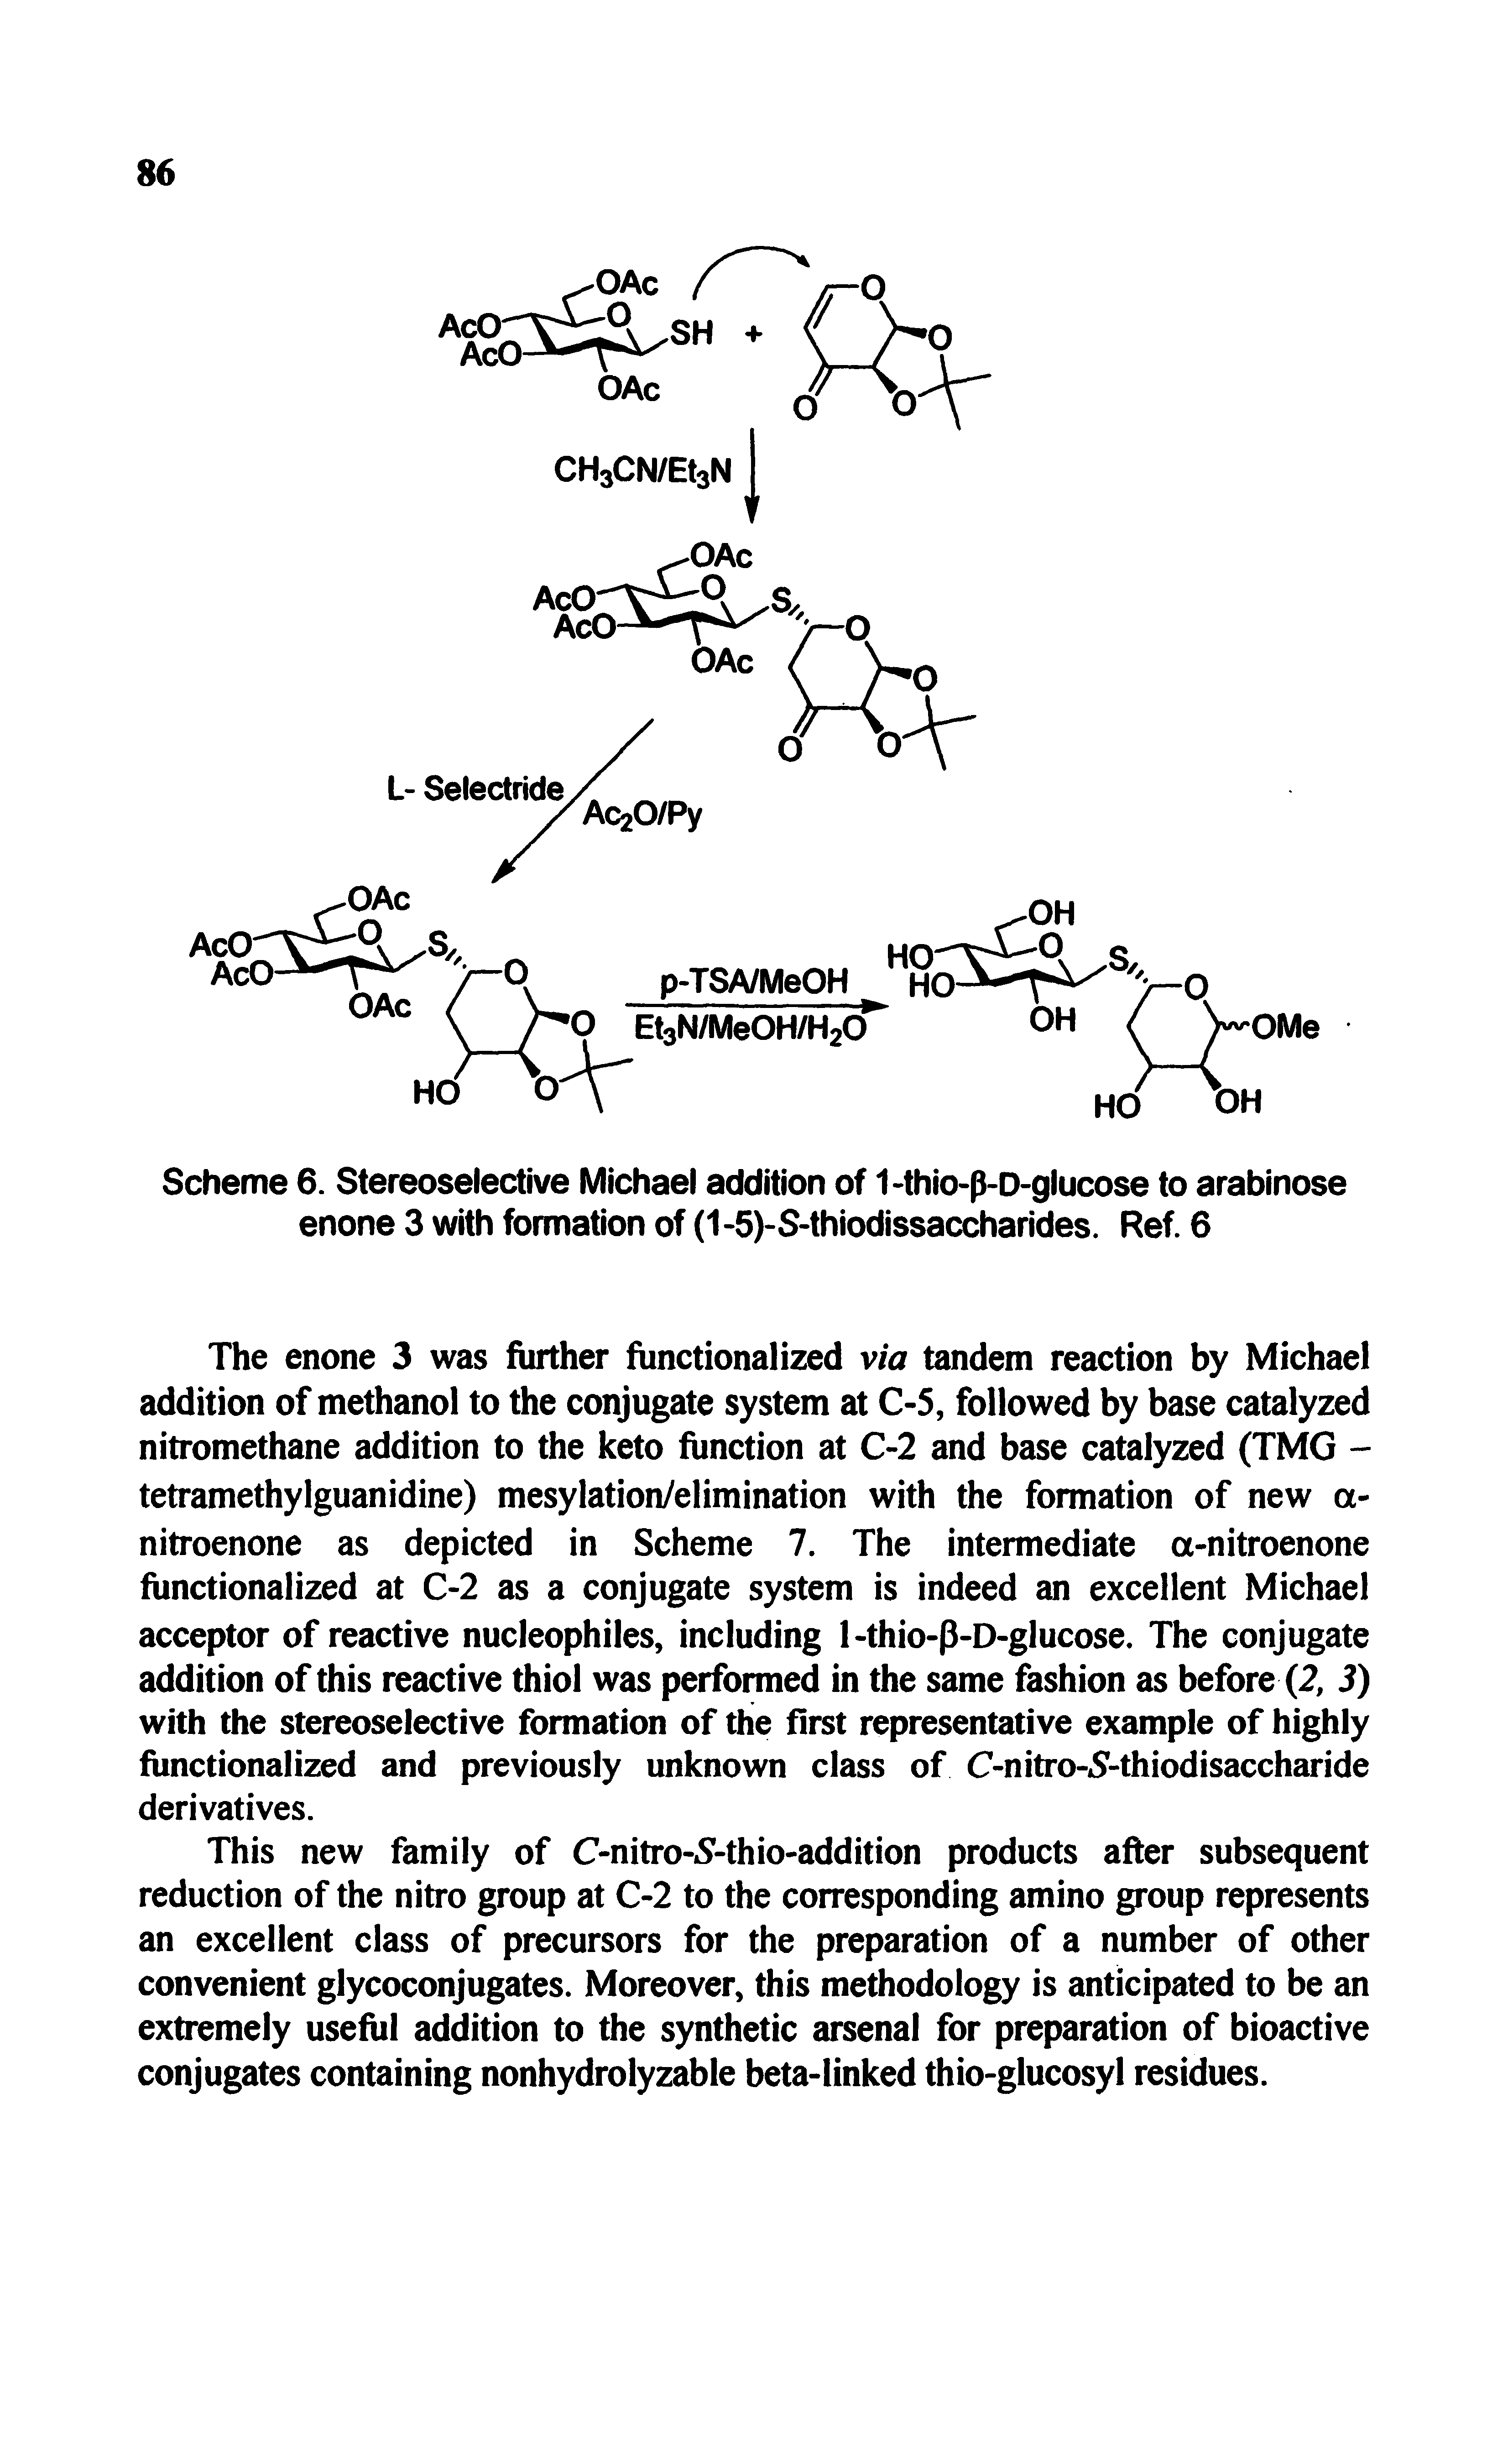 Scheme 6. Stereoselective Michael addition of 1-thio-p-D-glucose to arabinose enone 3 with formation of (1-5)-S-thiodissaccharides. Ref. 6...